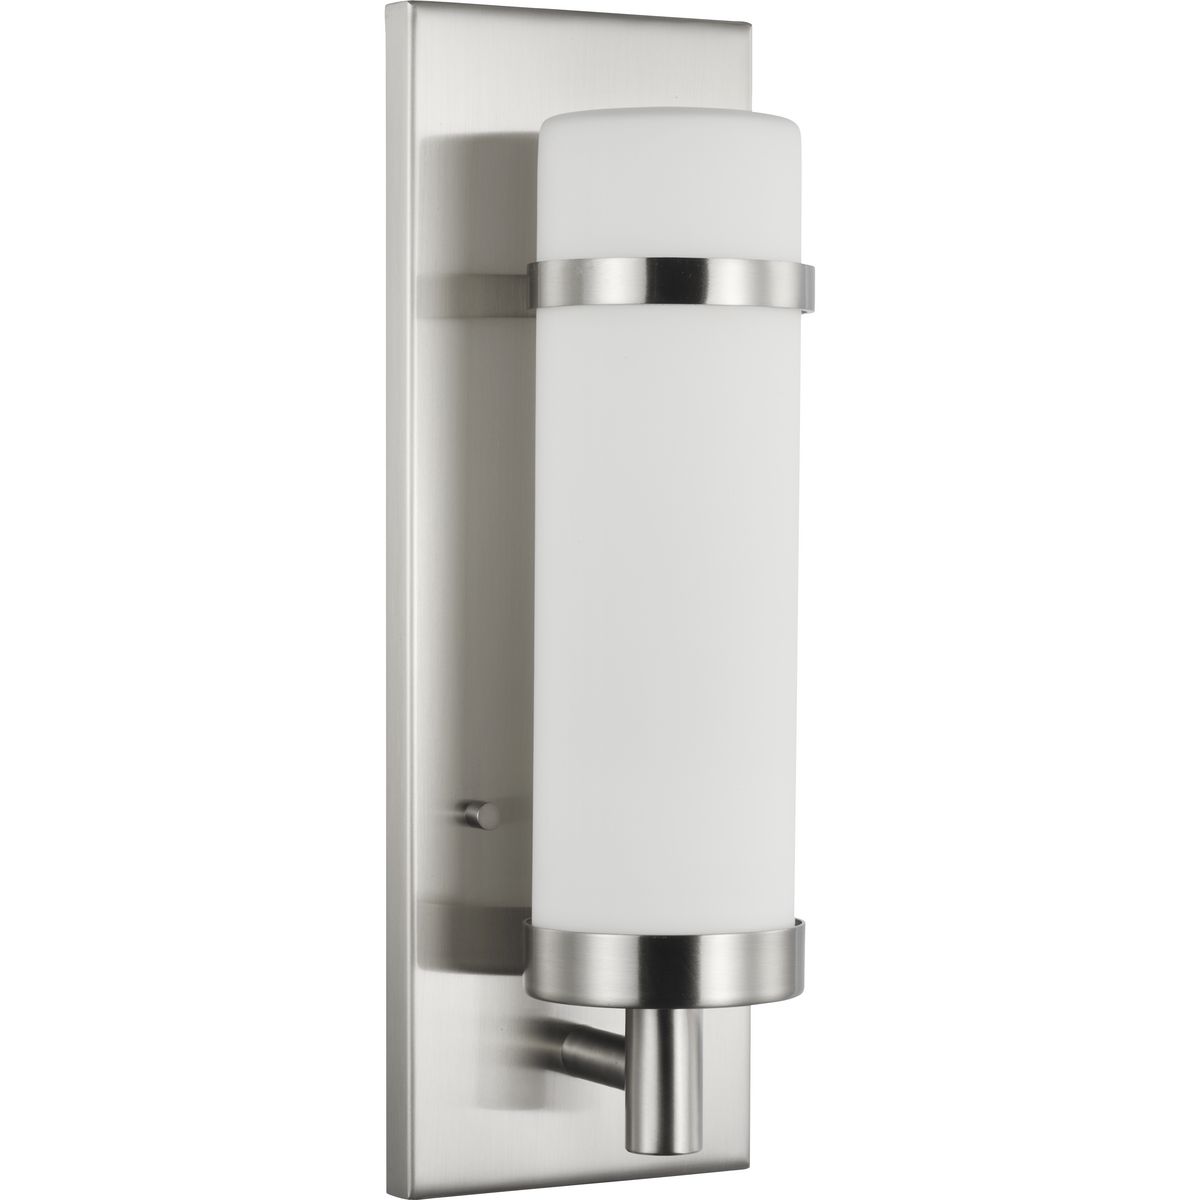 Hartwick Collection Brushed Nickel One-Light Wall Sconce - Damp Location Listed - Model P710088-009